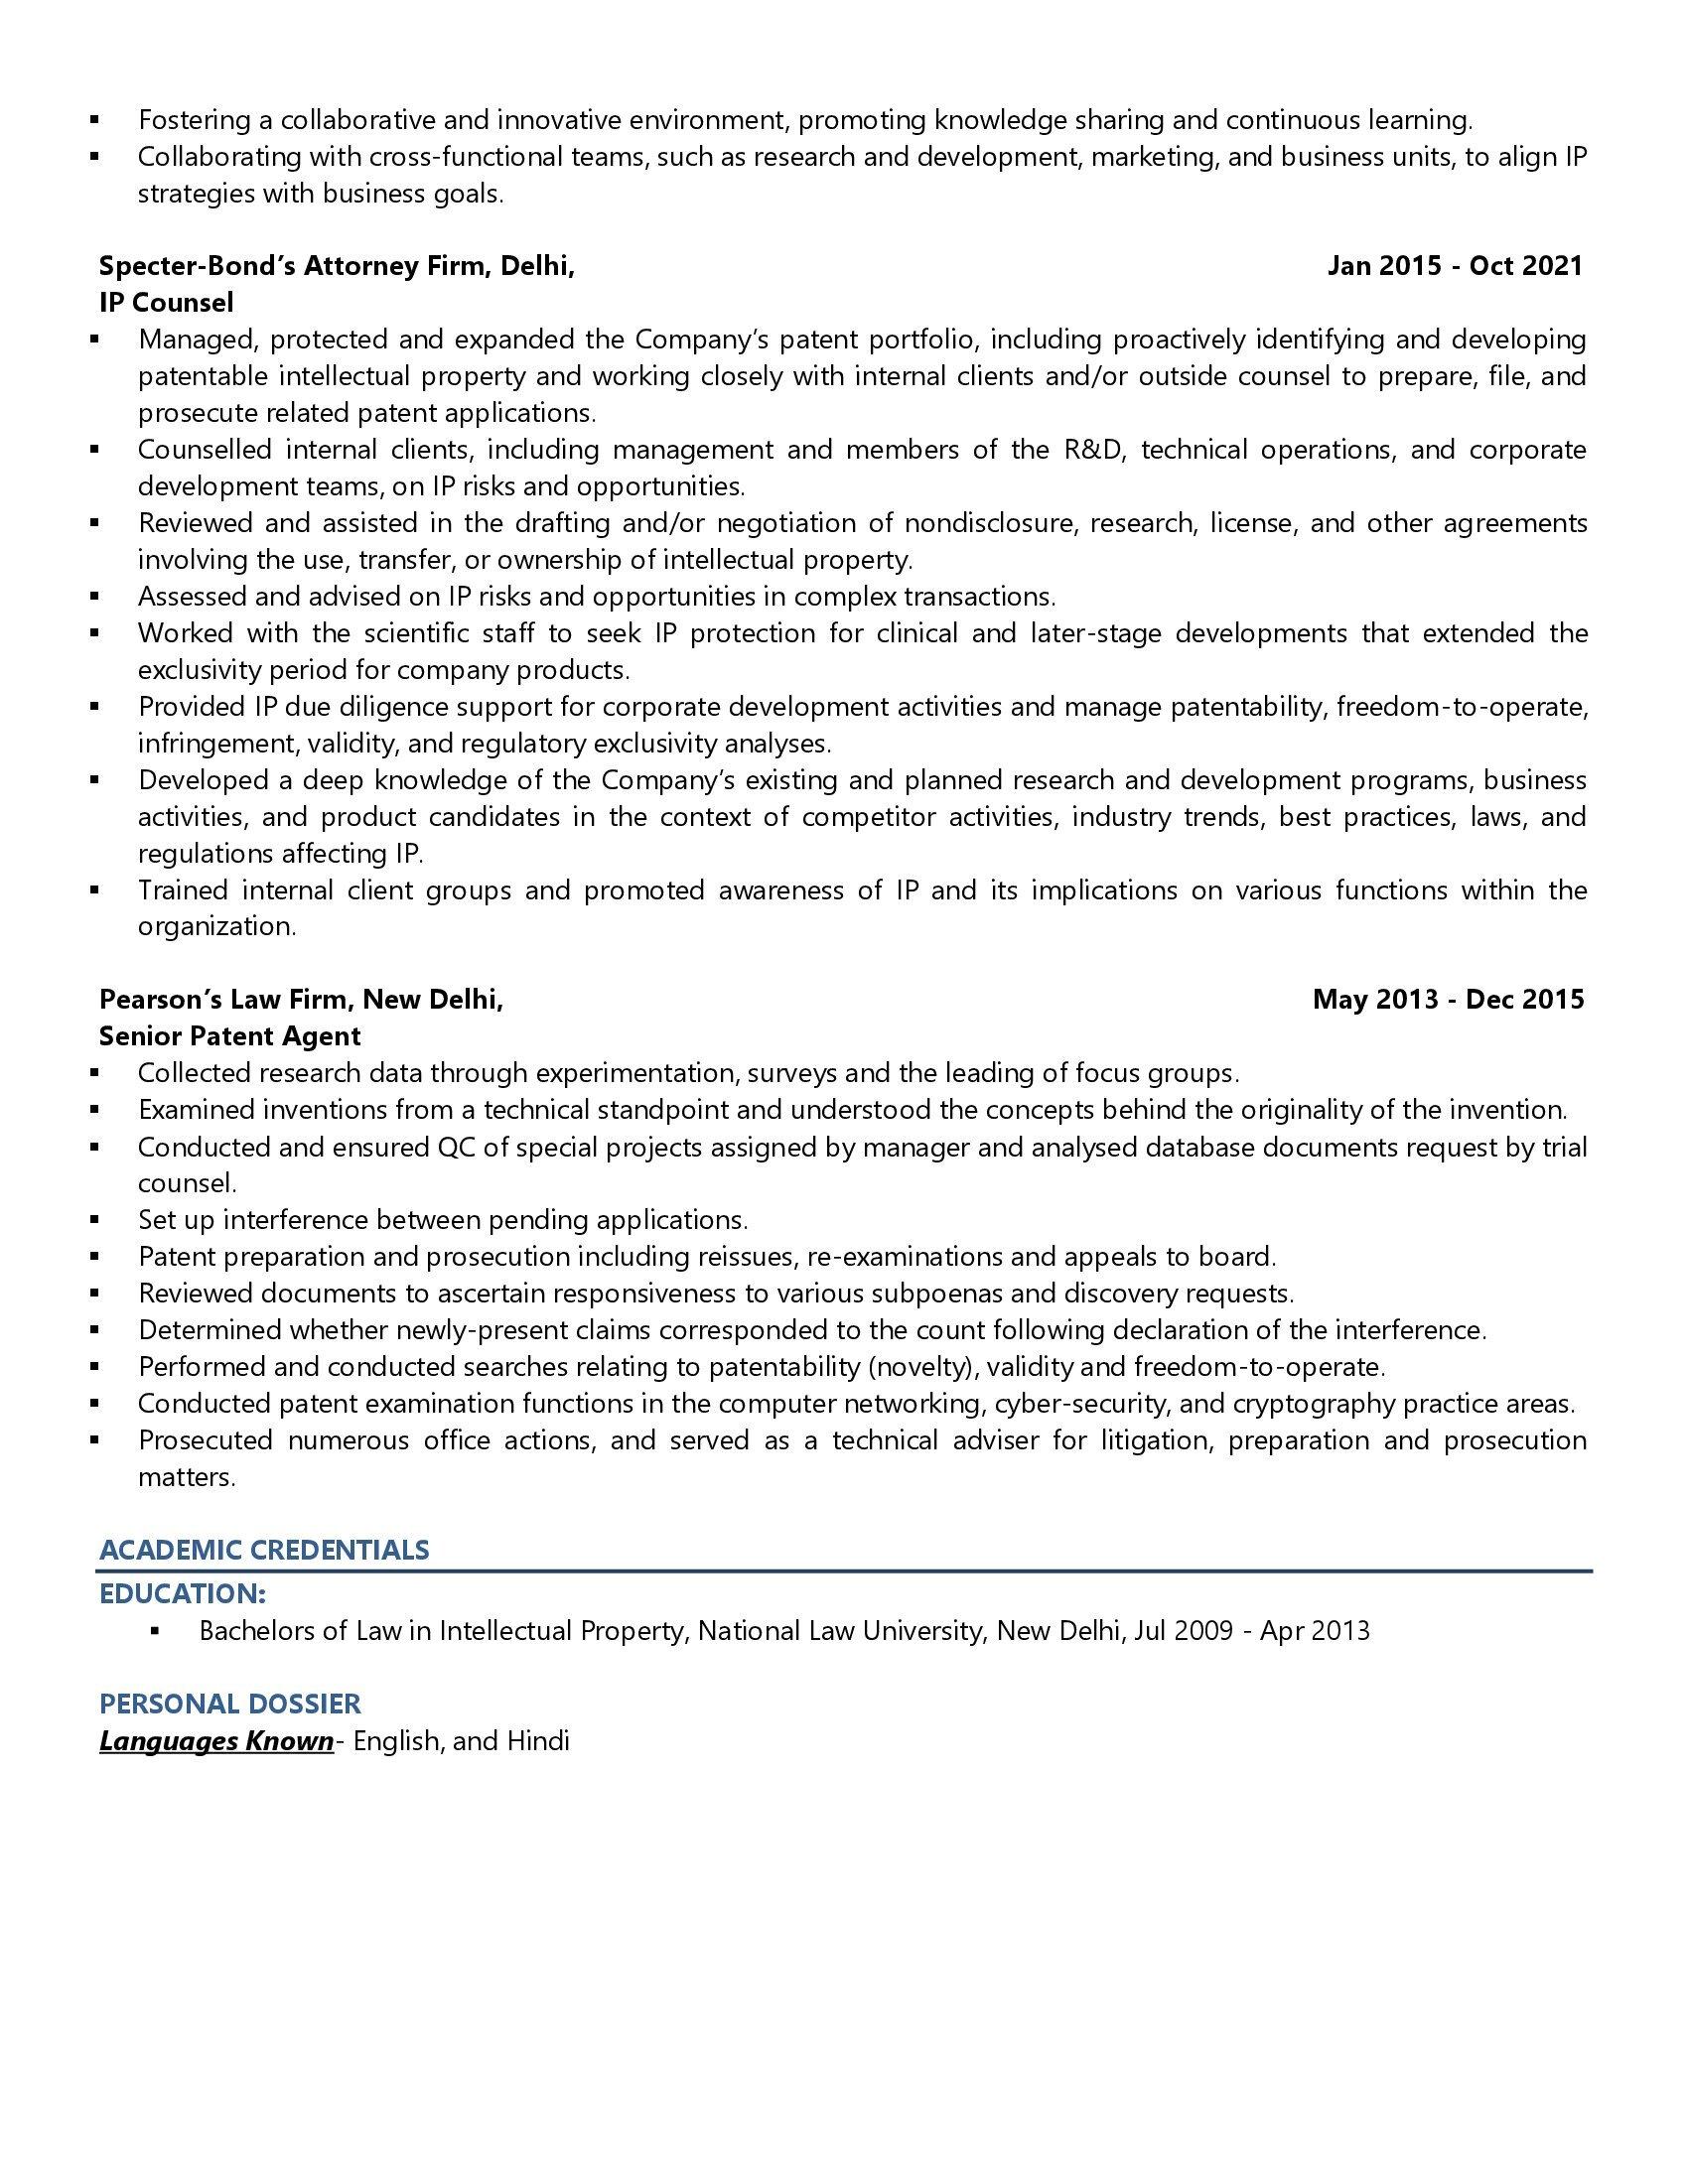 Chief of IP Counsel - Resume Example & Template